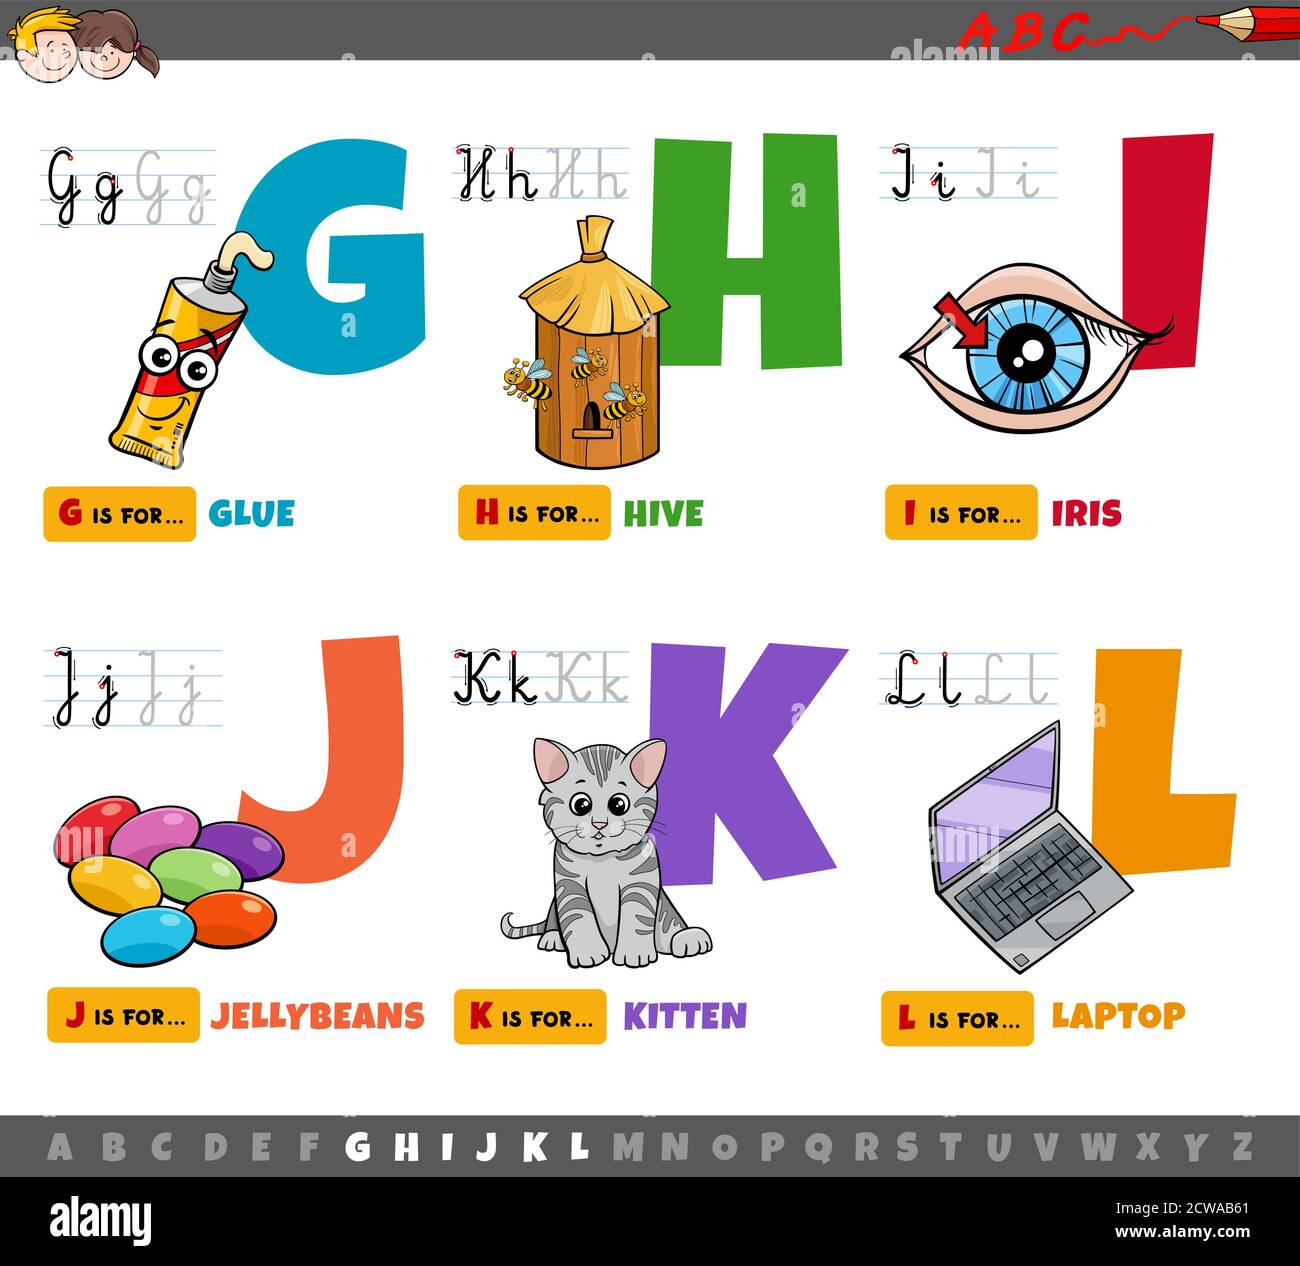 Cartoon Illustration of Capital Letters Alphabet Educational Set for Reading and Writing Learning for Preschool and Elementary Age Children from G to Stock Vector